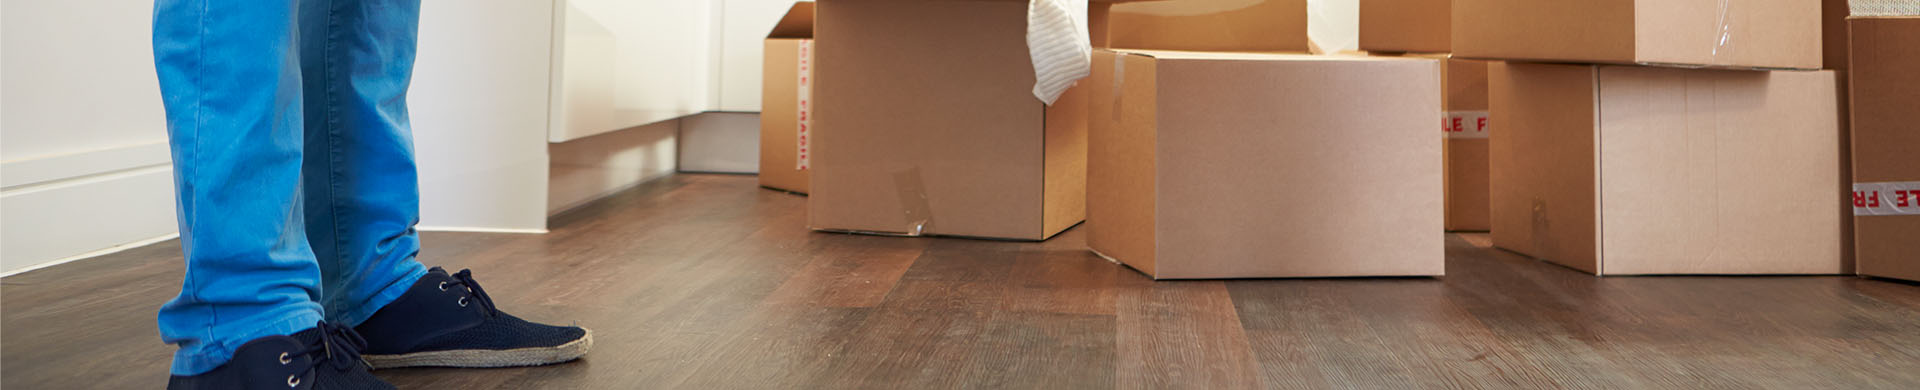 Person Unpacking After a Move